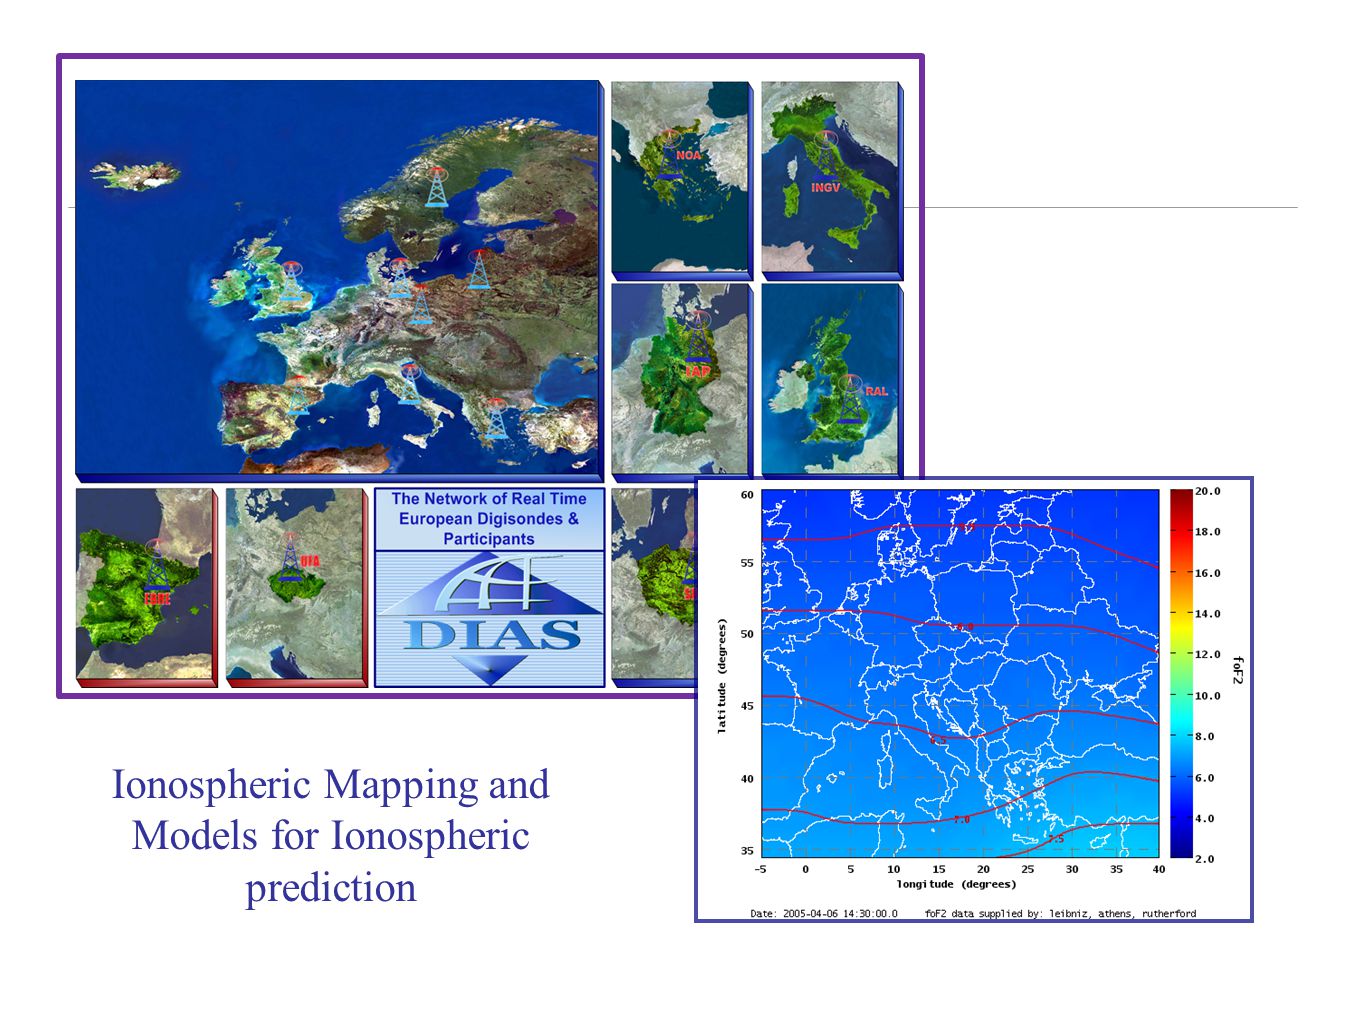 Ionospheric Mapping and Models for Ionospheric prediction